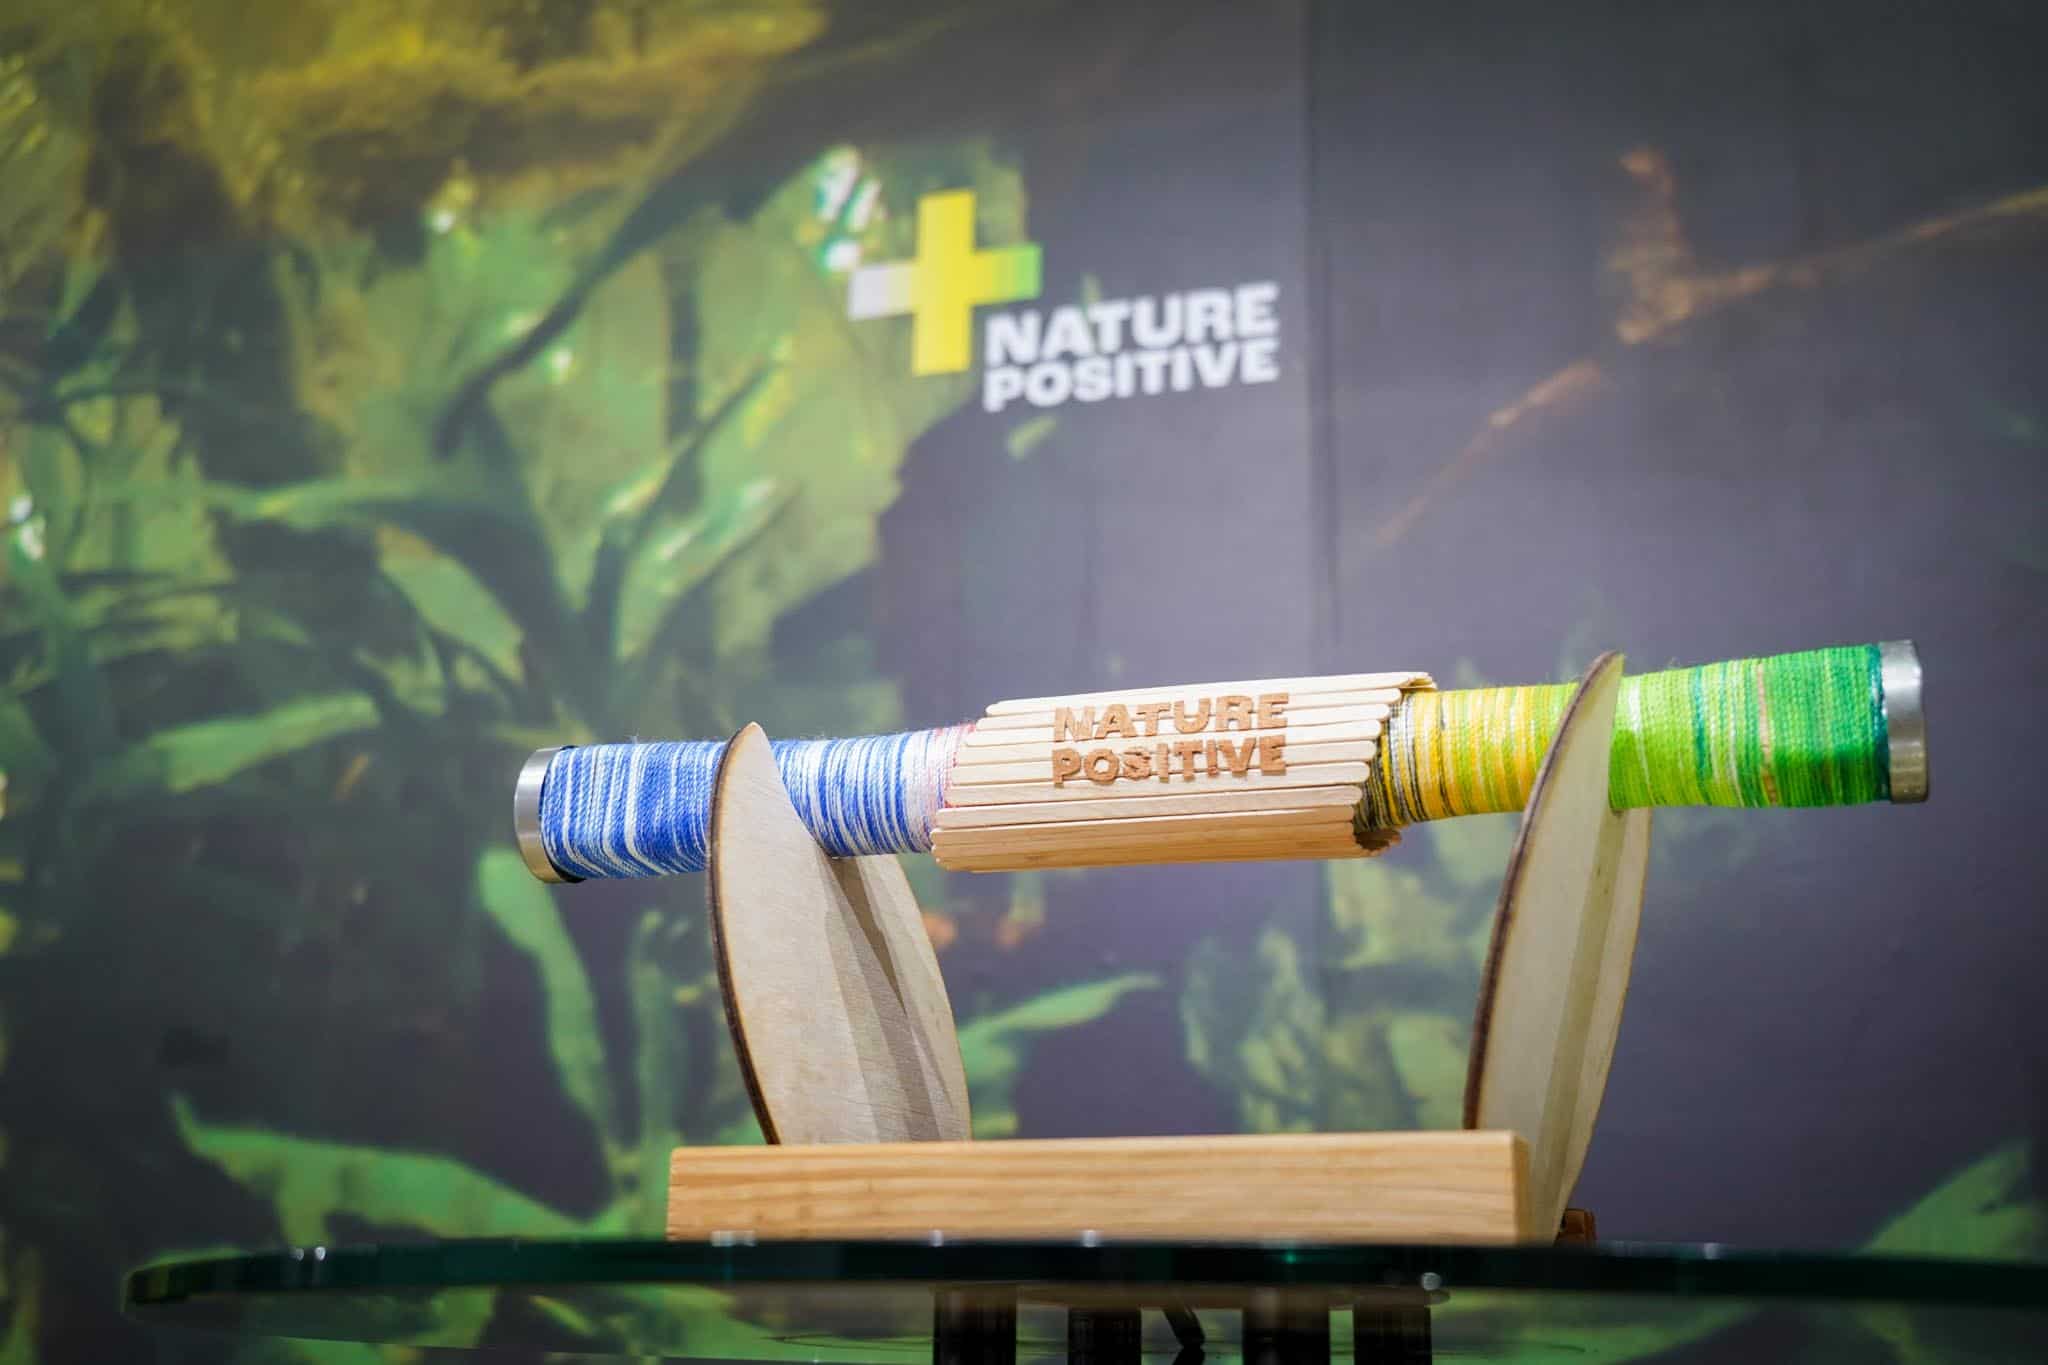 The Nature Positive Baton with nature stripes